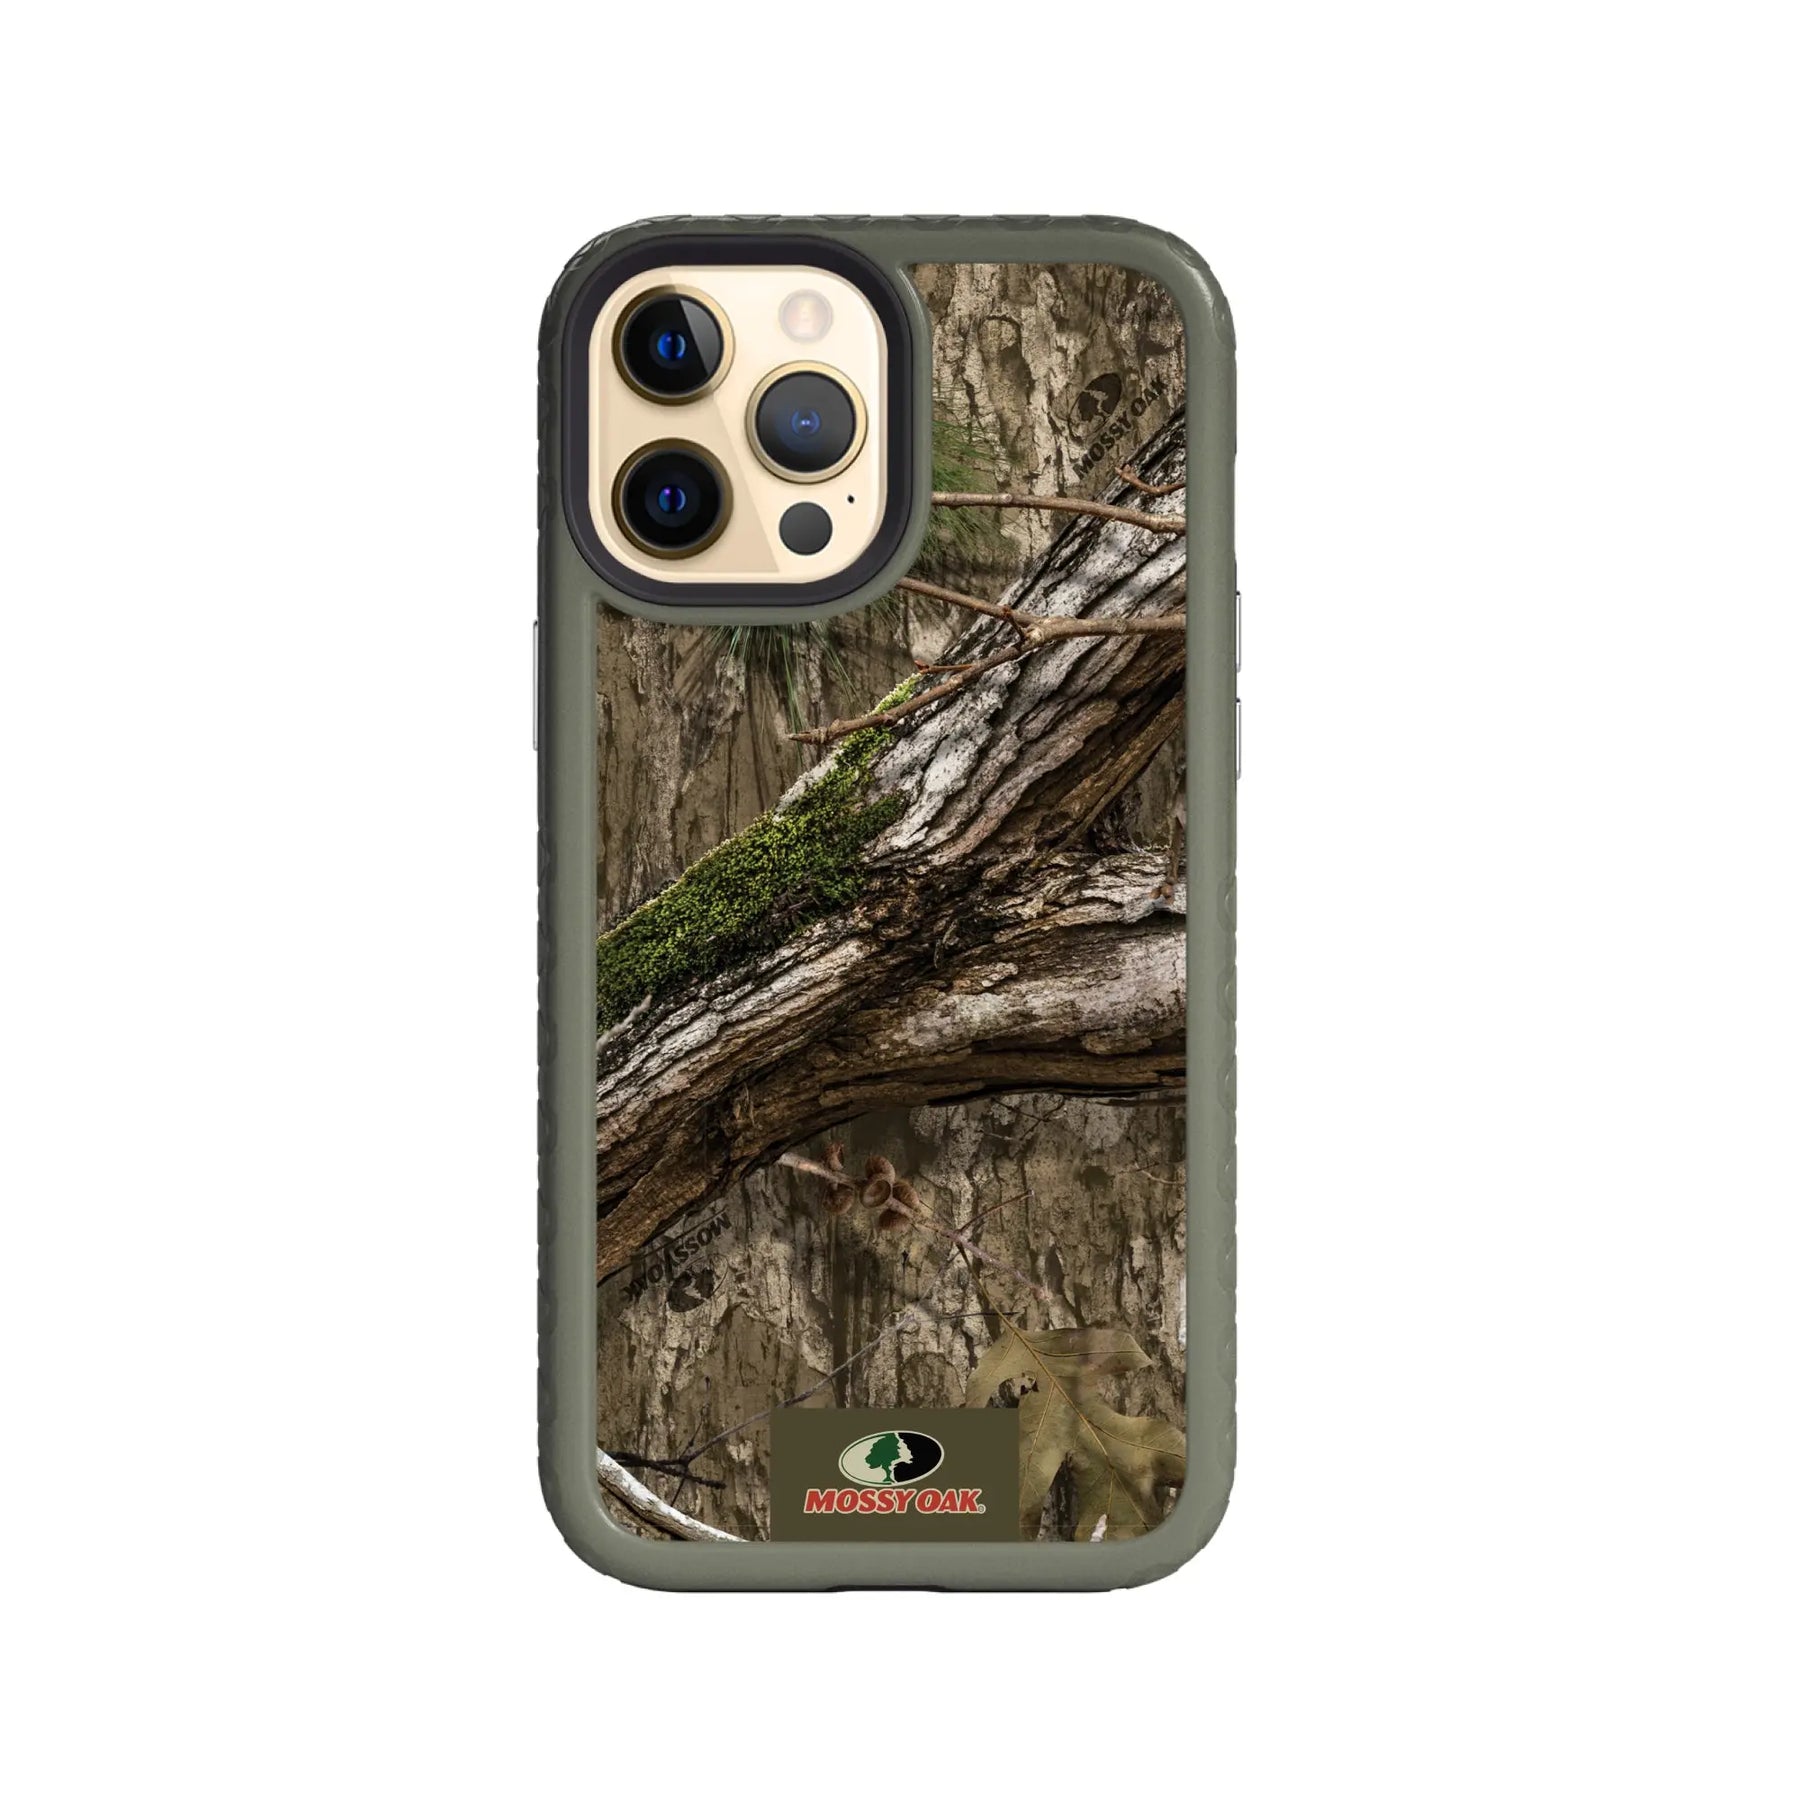 Mossy Oak Fortitude Series for Apple iPhone 12 Pro Max - Country DNA - Custom Case - OliveDrabGreen - cellhelmet